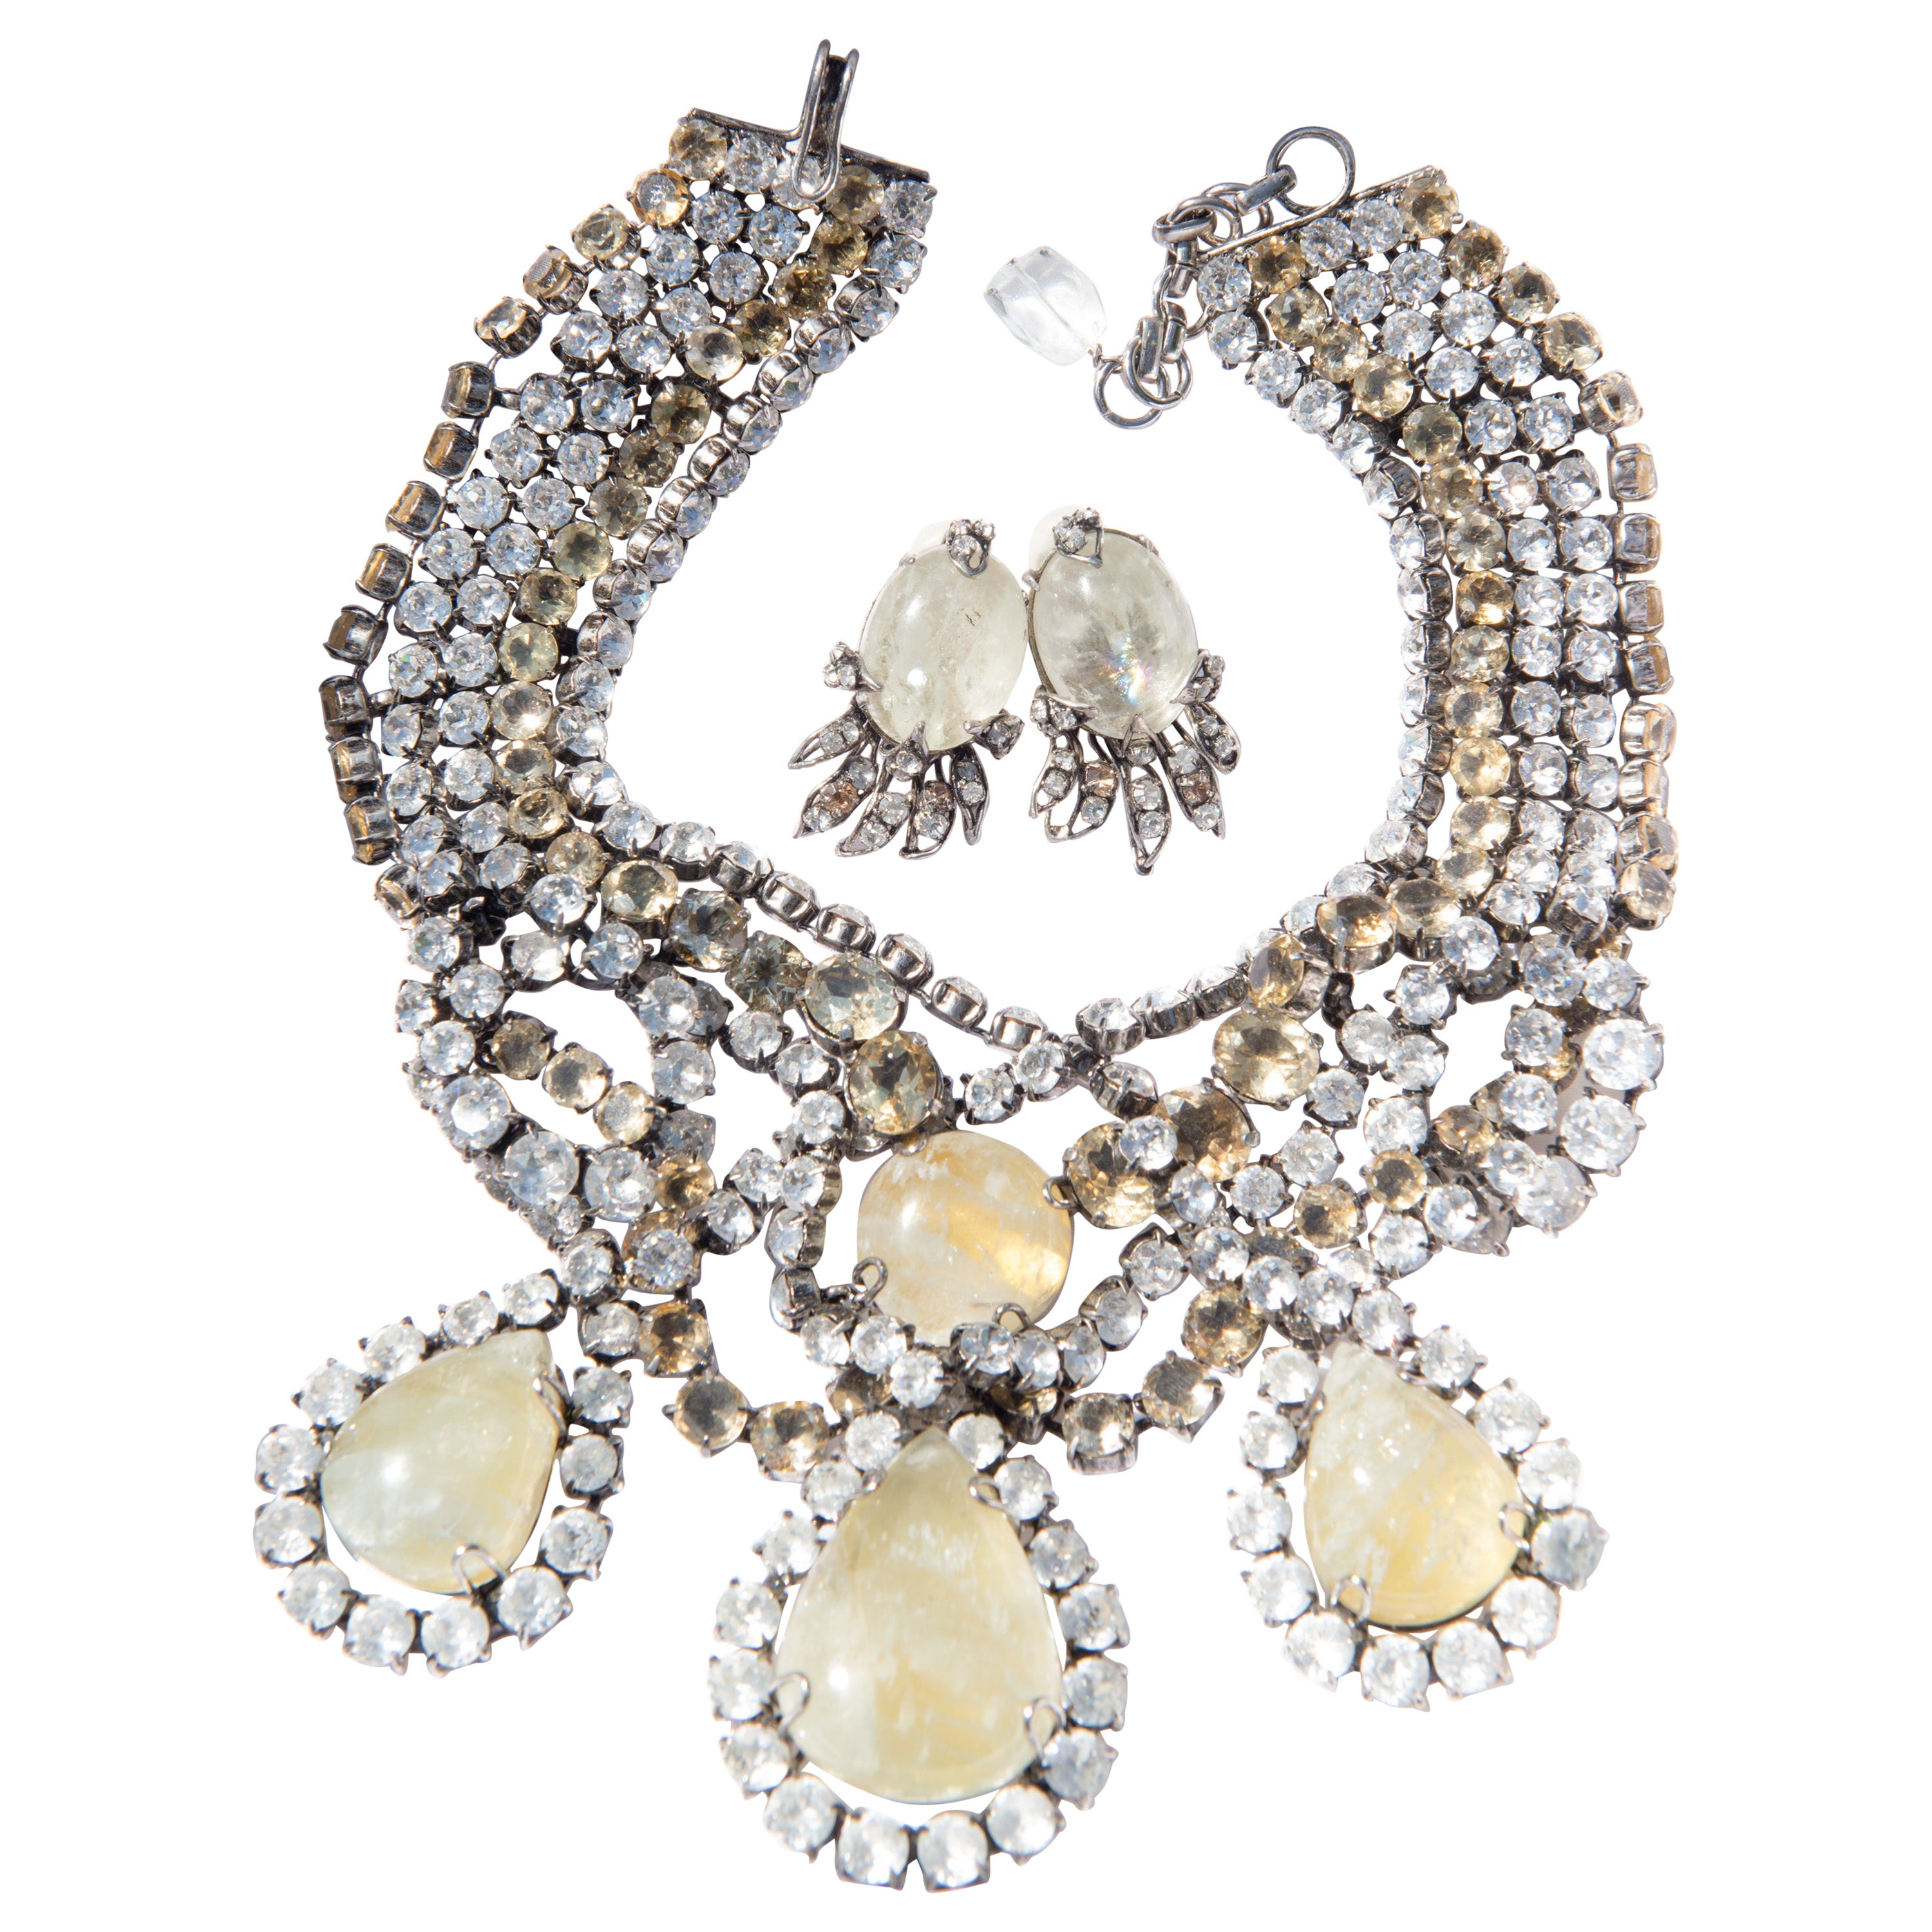 Iradj Moini Gemstone Crystal Necklace and Earring Set For Sale